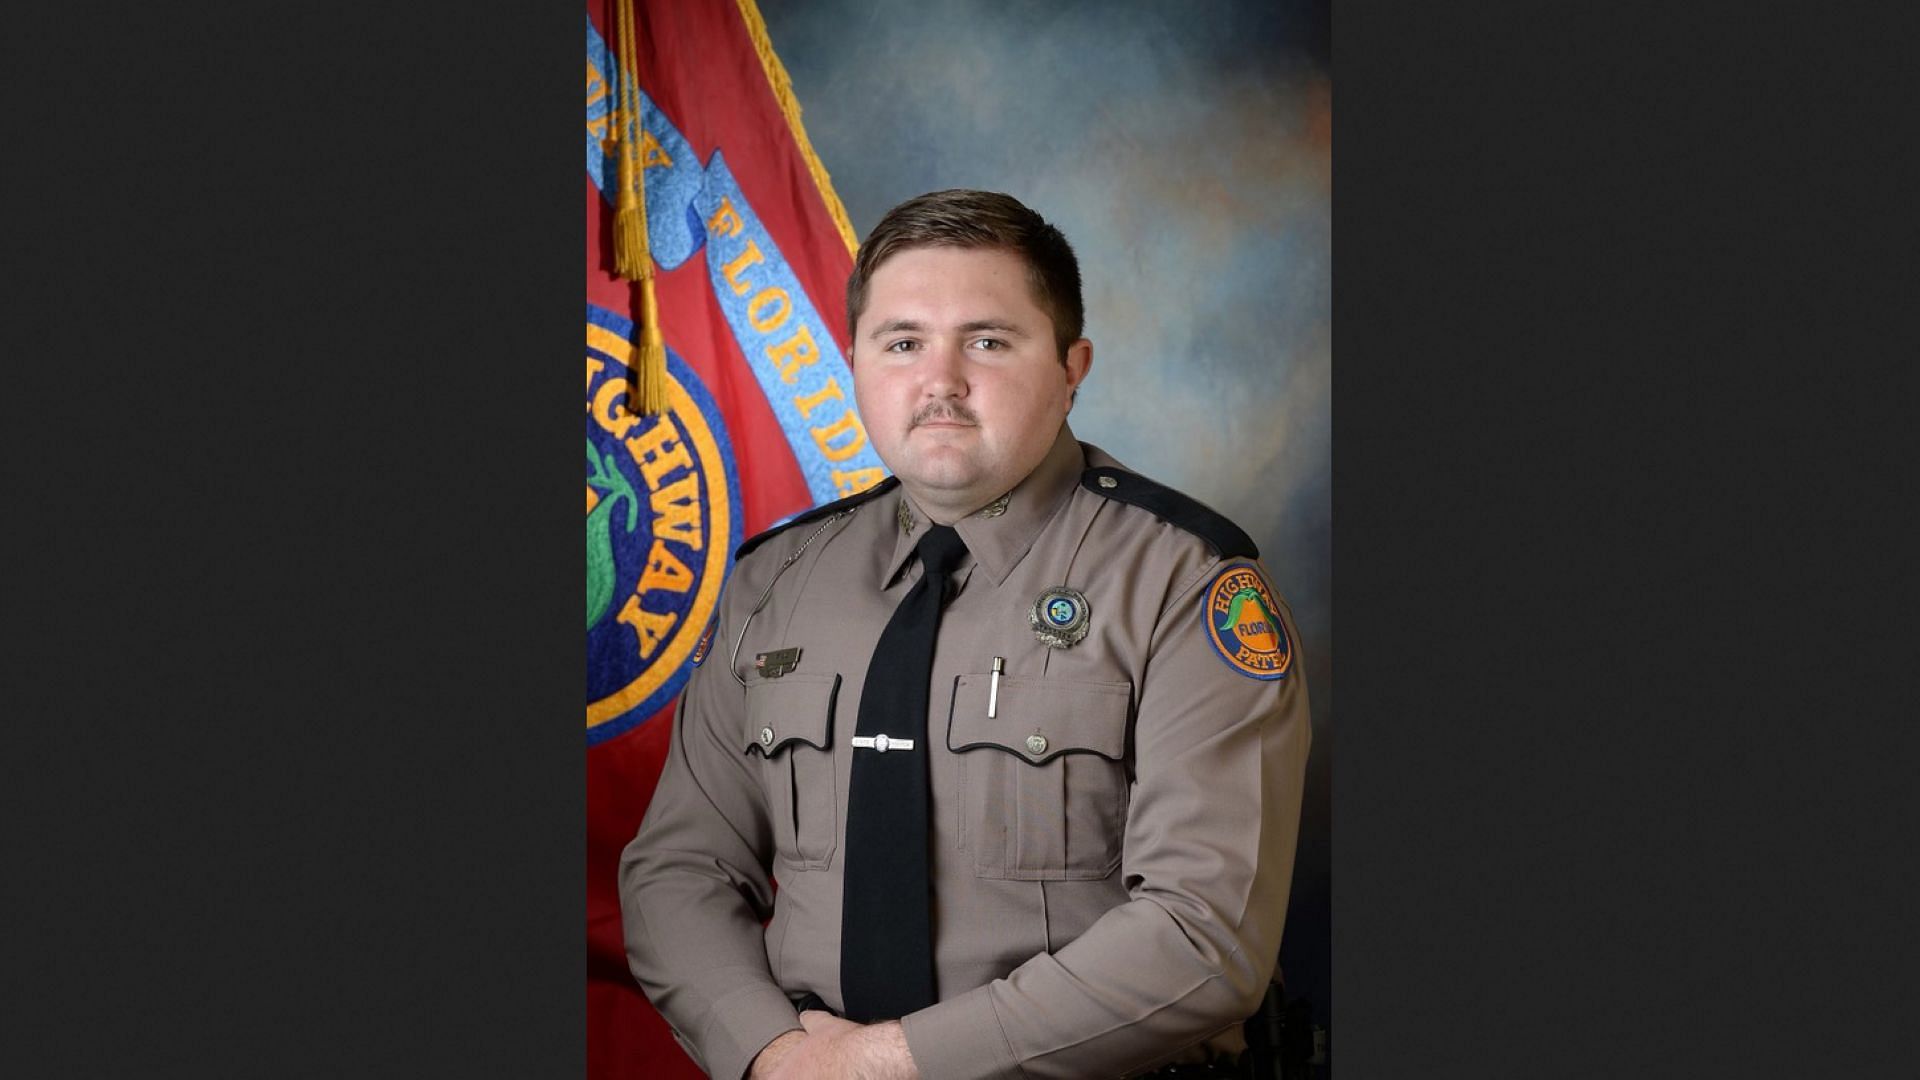 Tributes pour in as Florida Highway Patrol trooper Zachary Fink killed in line of duty. (Image via Officer Down Memorial Page)